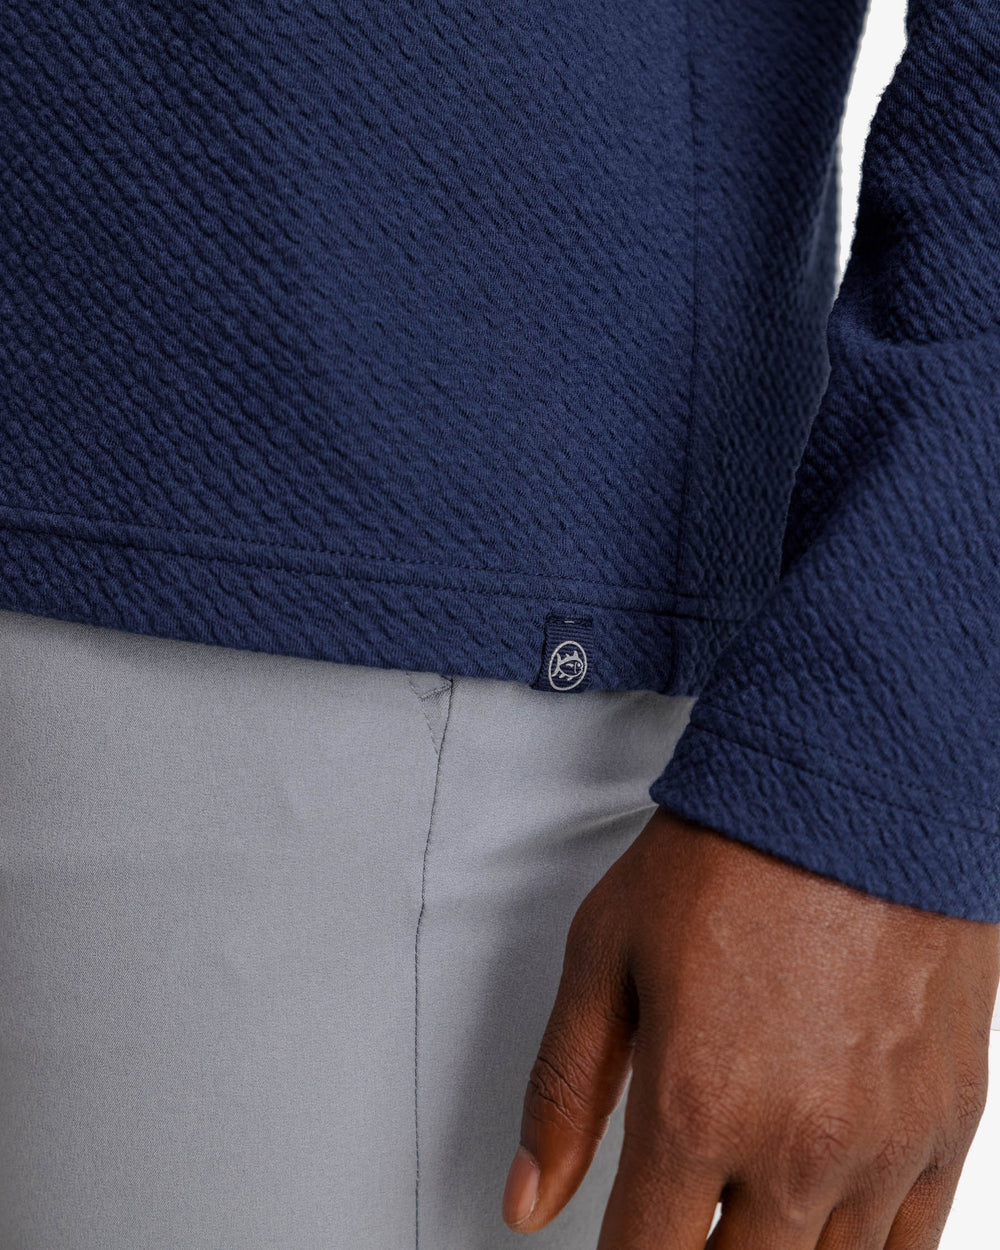 The label view of the Outbound Quarter Zip Pullover by Southern Tide - Heather True Navy